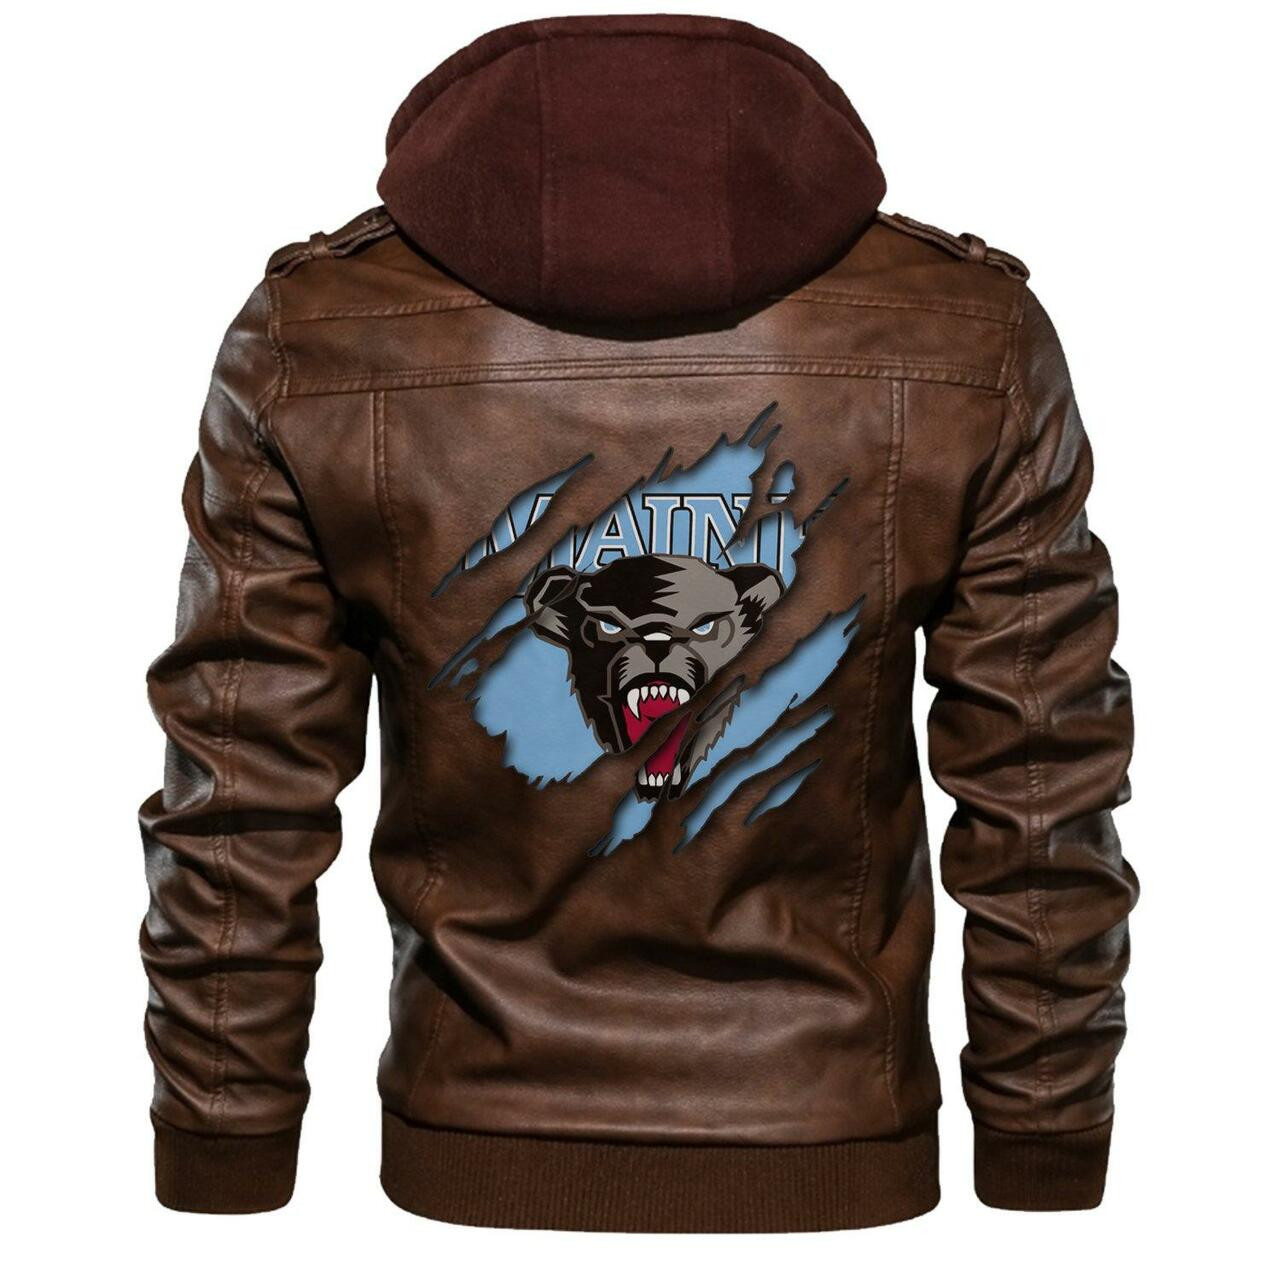 Check out and find the right leather jacket below 185